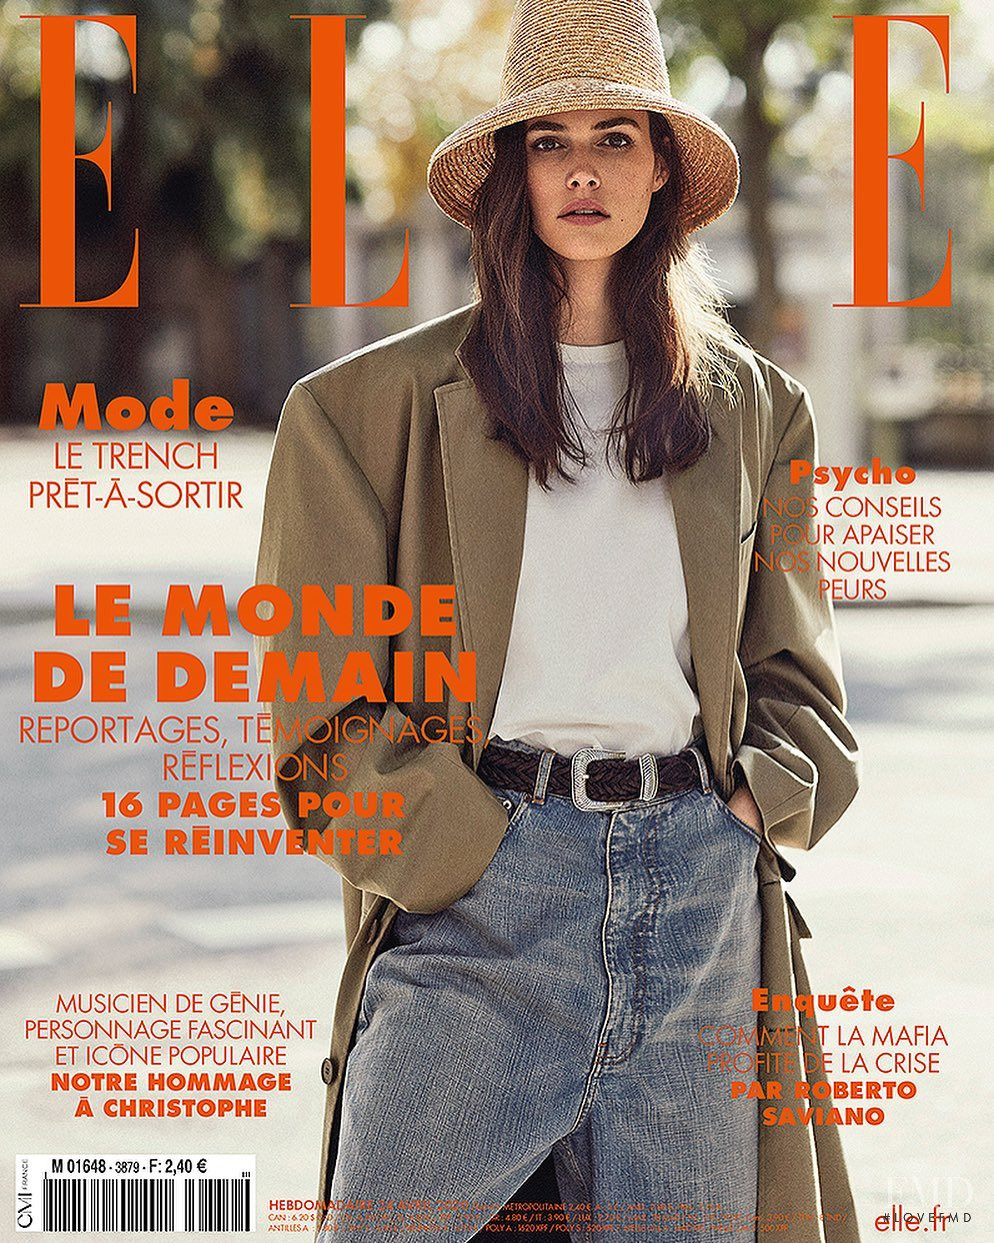 Cover of Elle France with Vanessa Moody, April 2020 (ID:55856 ...